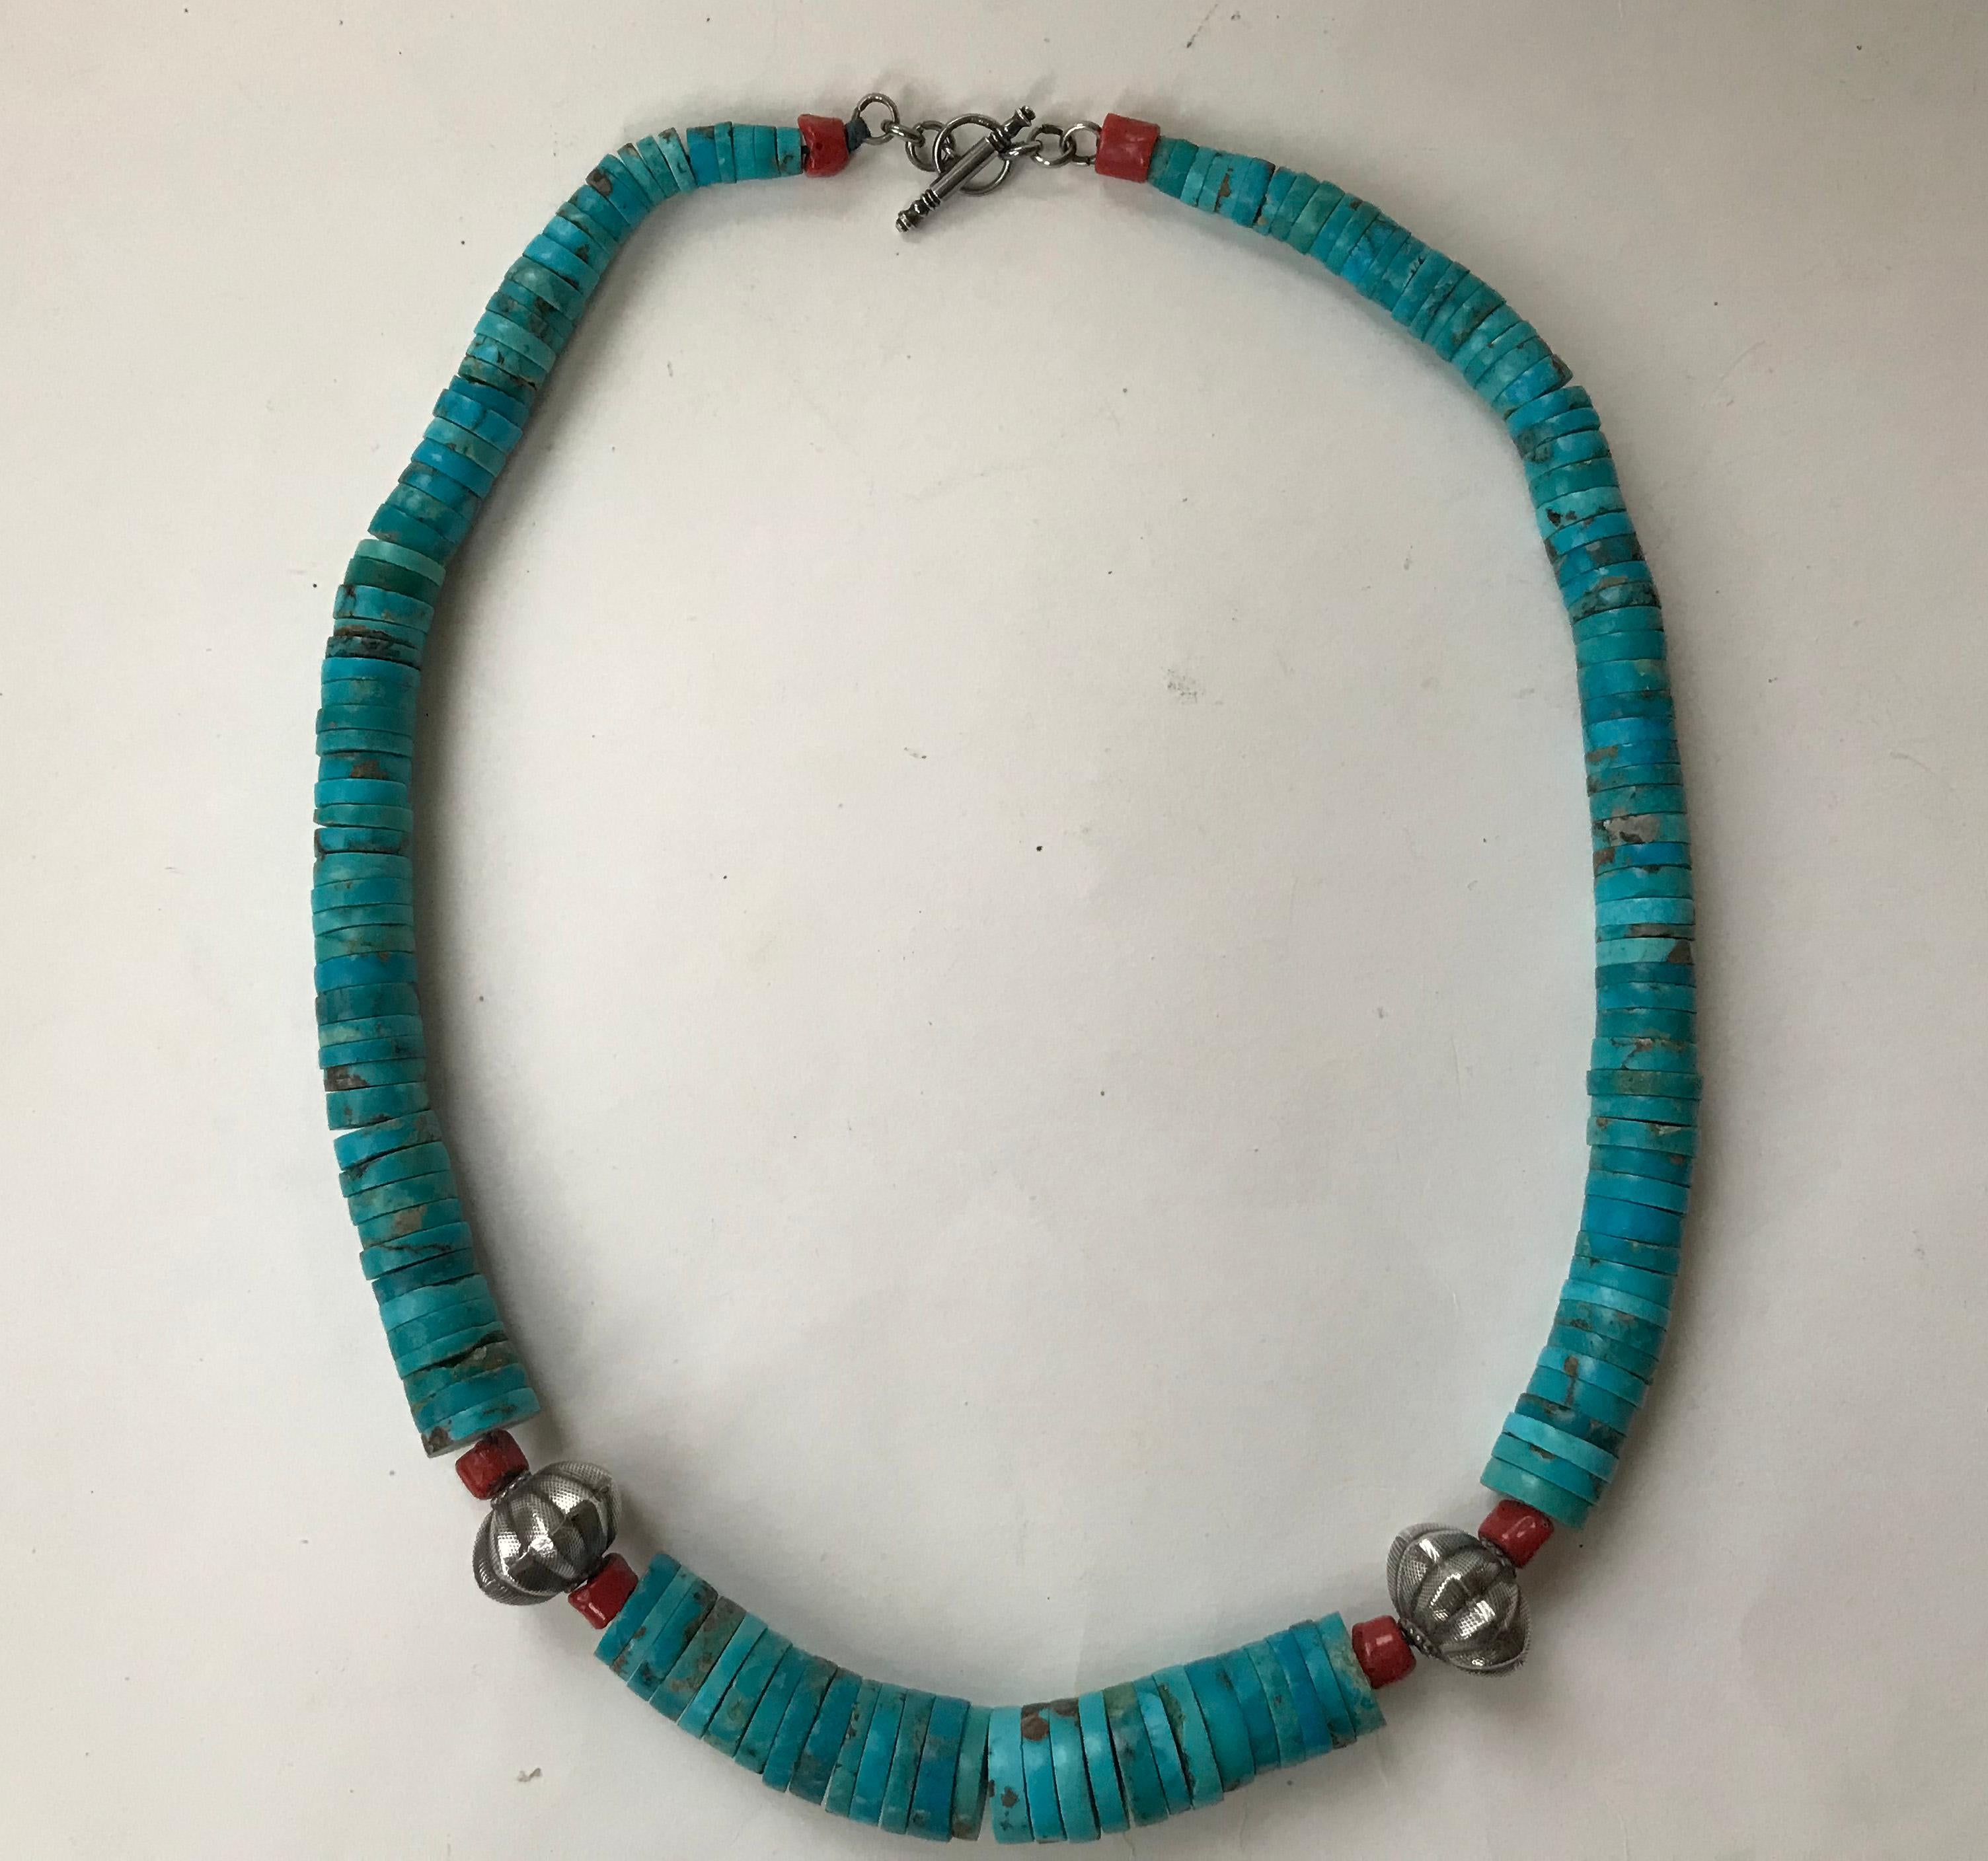 Native American style Artisan turquoise Coral & sterling Heishi Neckace.
Circa 1970`s.
Large graduated turquoise sliced stones with silver and coral beads.